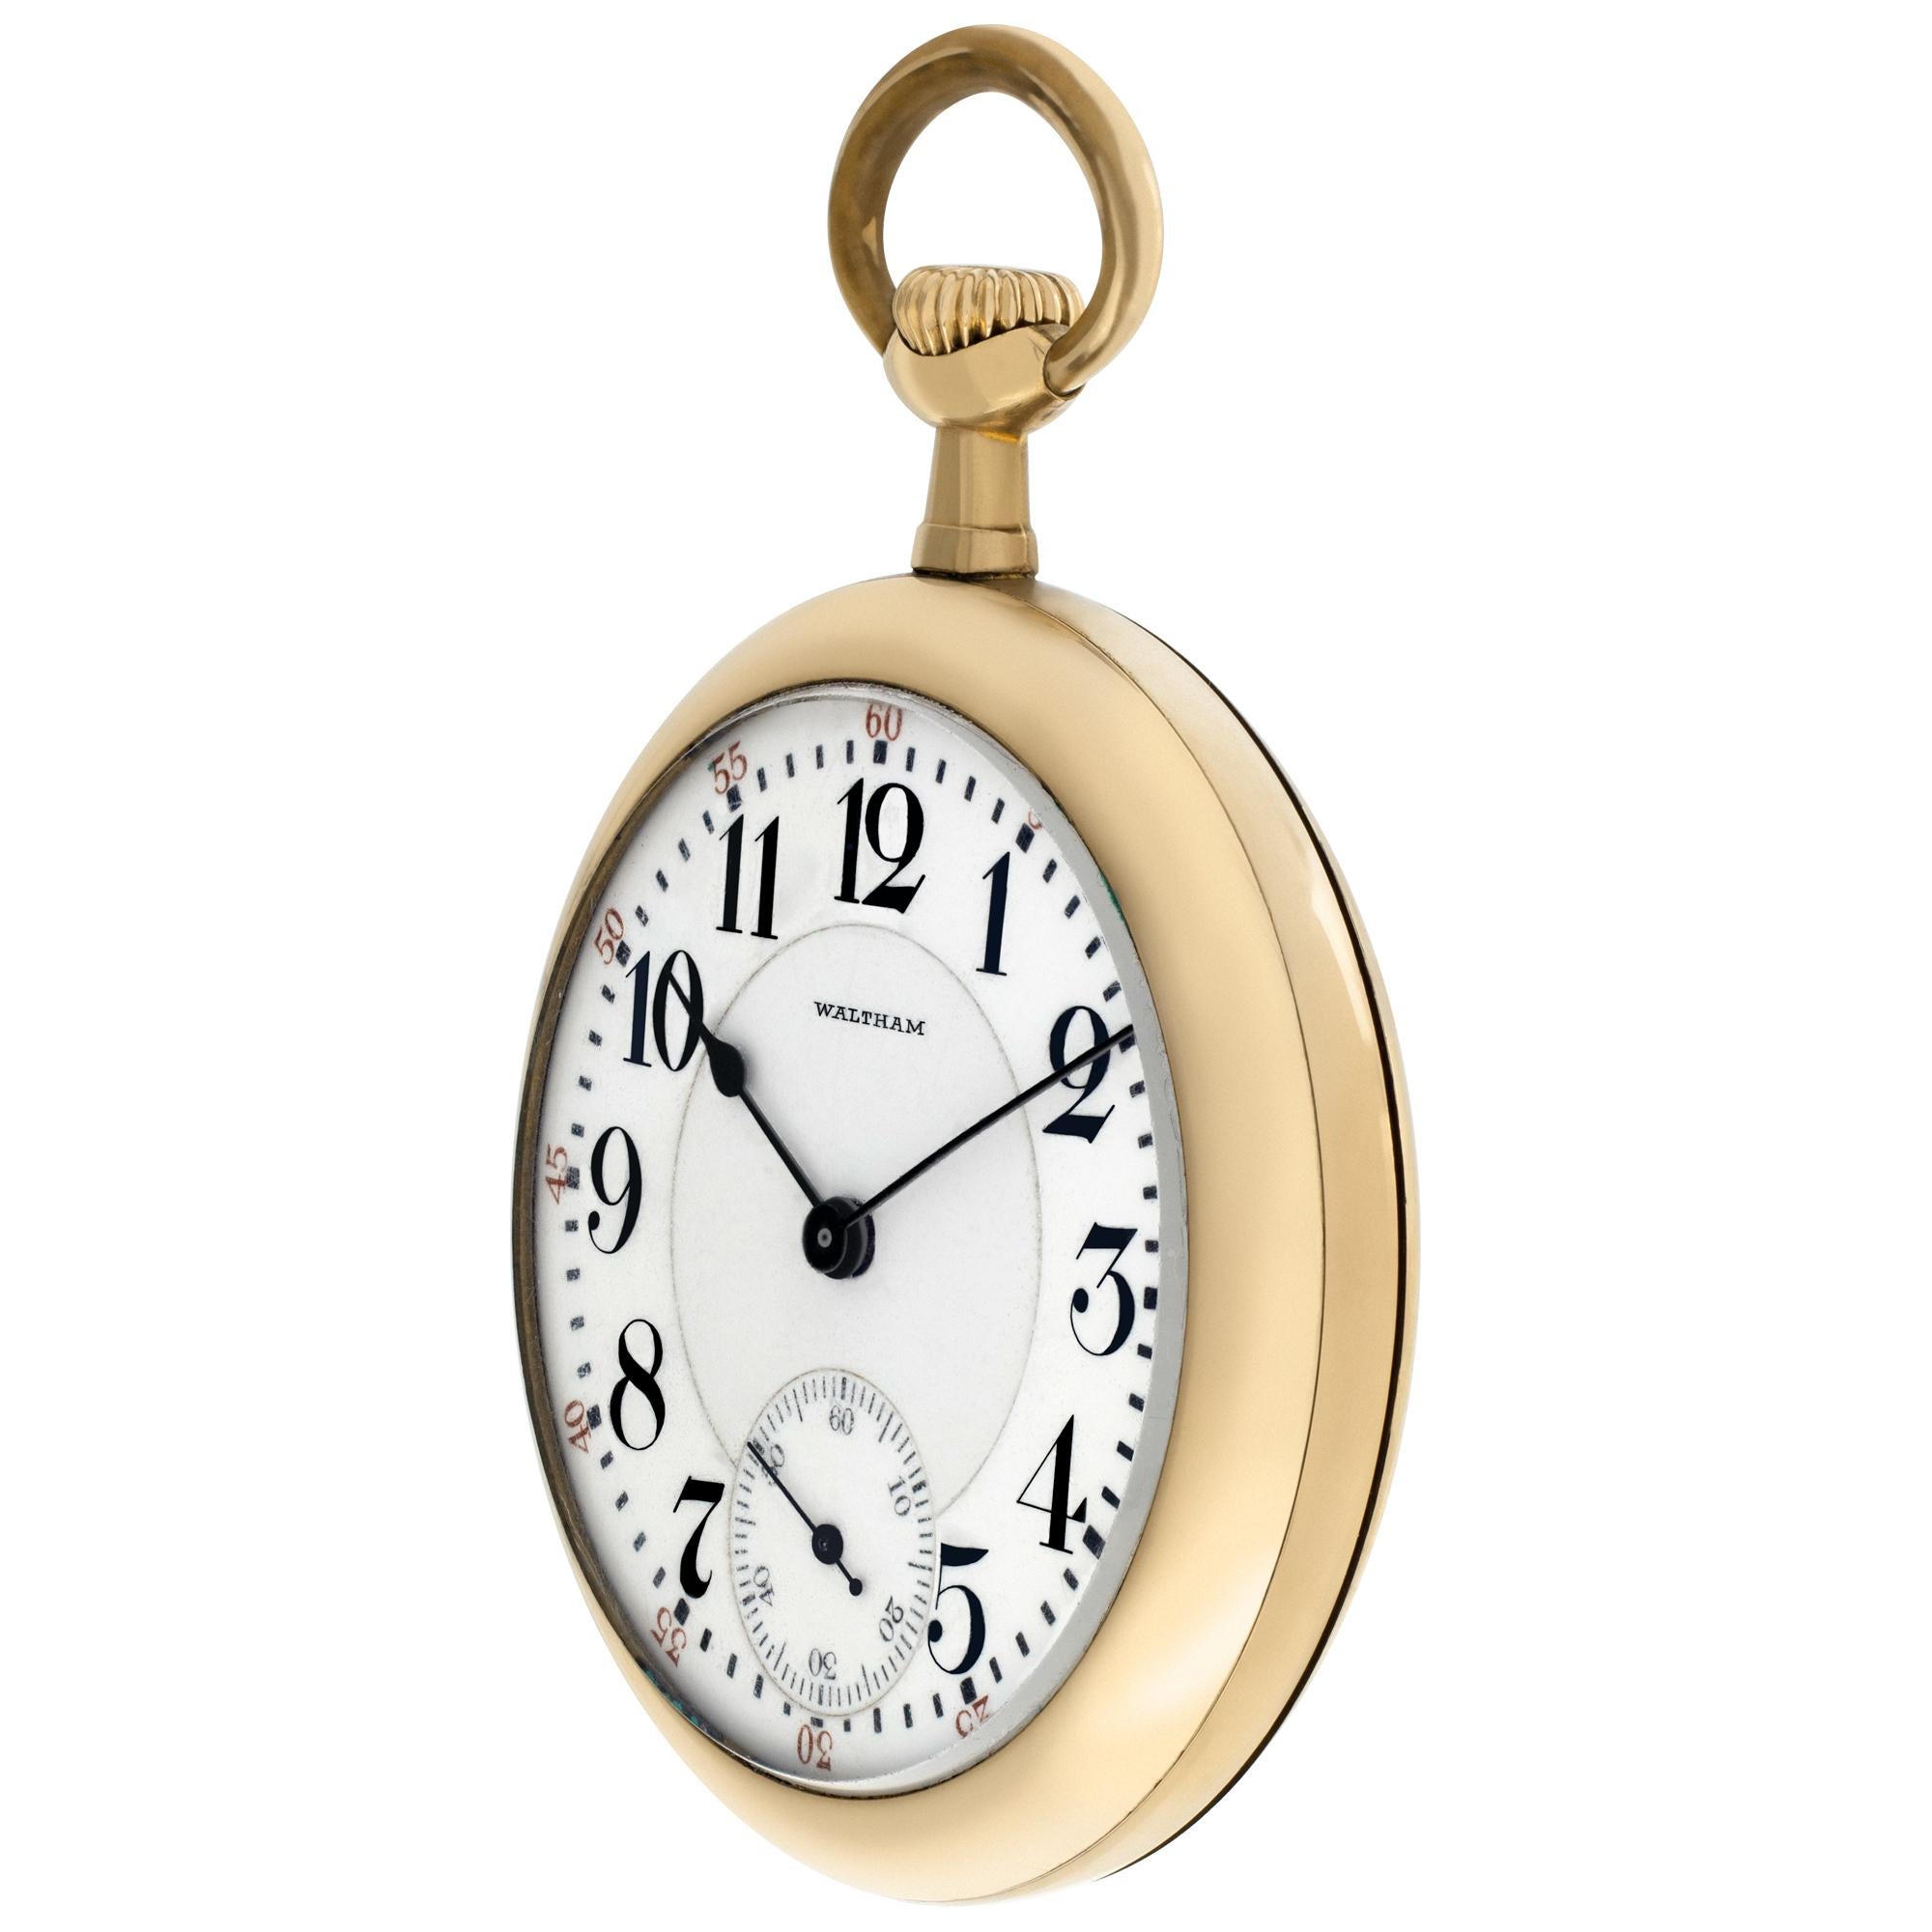 Waltham pocket watch with 20 year gold filled case. Triple sunk white dial with Arabic numerals and sub-seconds. 16 size. 19 jewel manual wind Riverside movement. 50 mm case size. Circa 1900's Fine Pre-owned Waltham Watch. Certified preowned Vintage